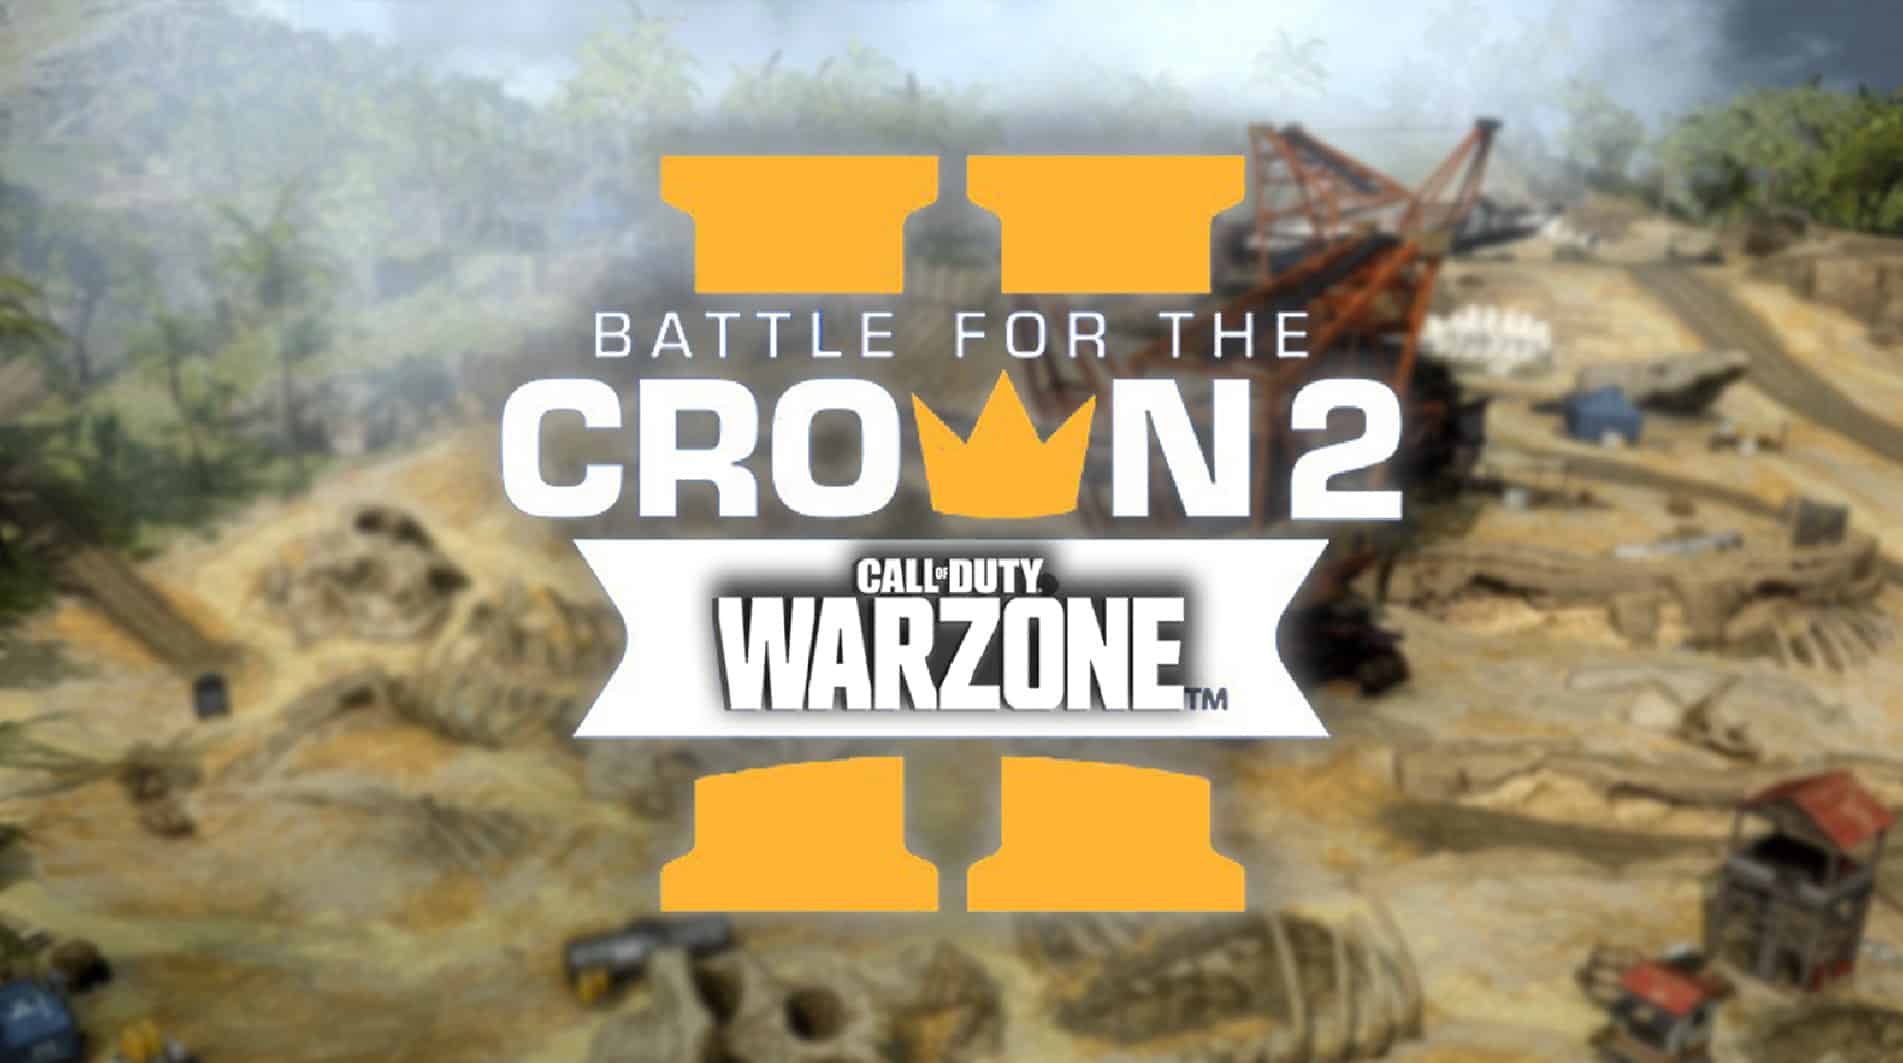 Warzone Battle for the crown event graphic